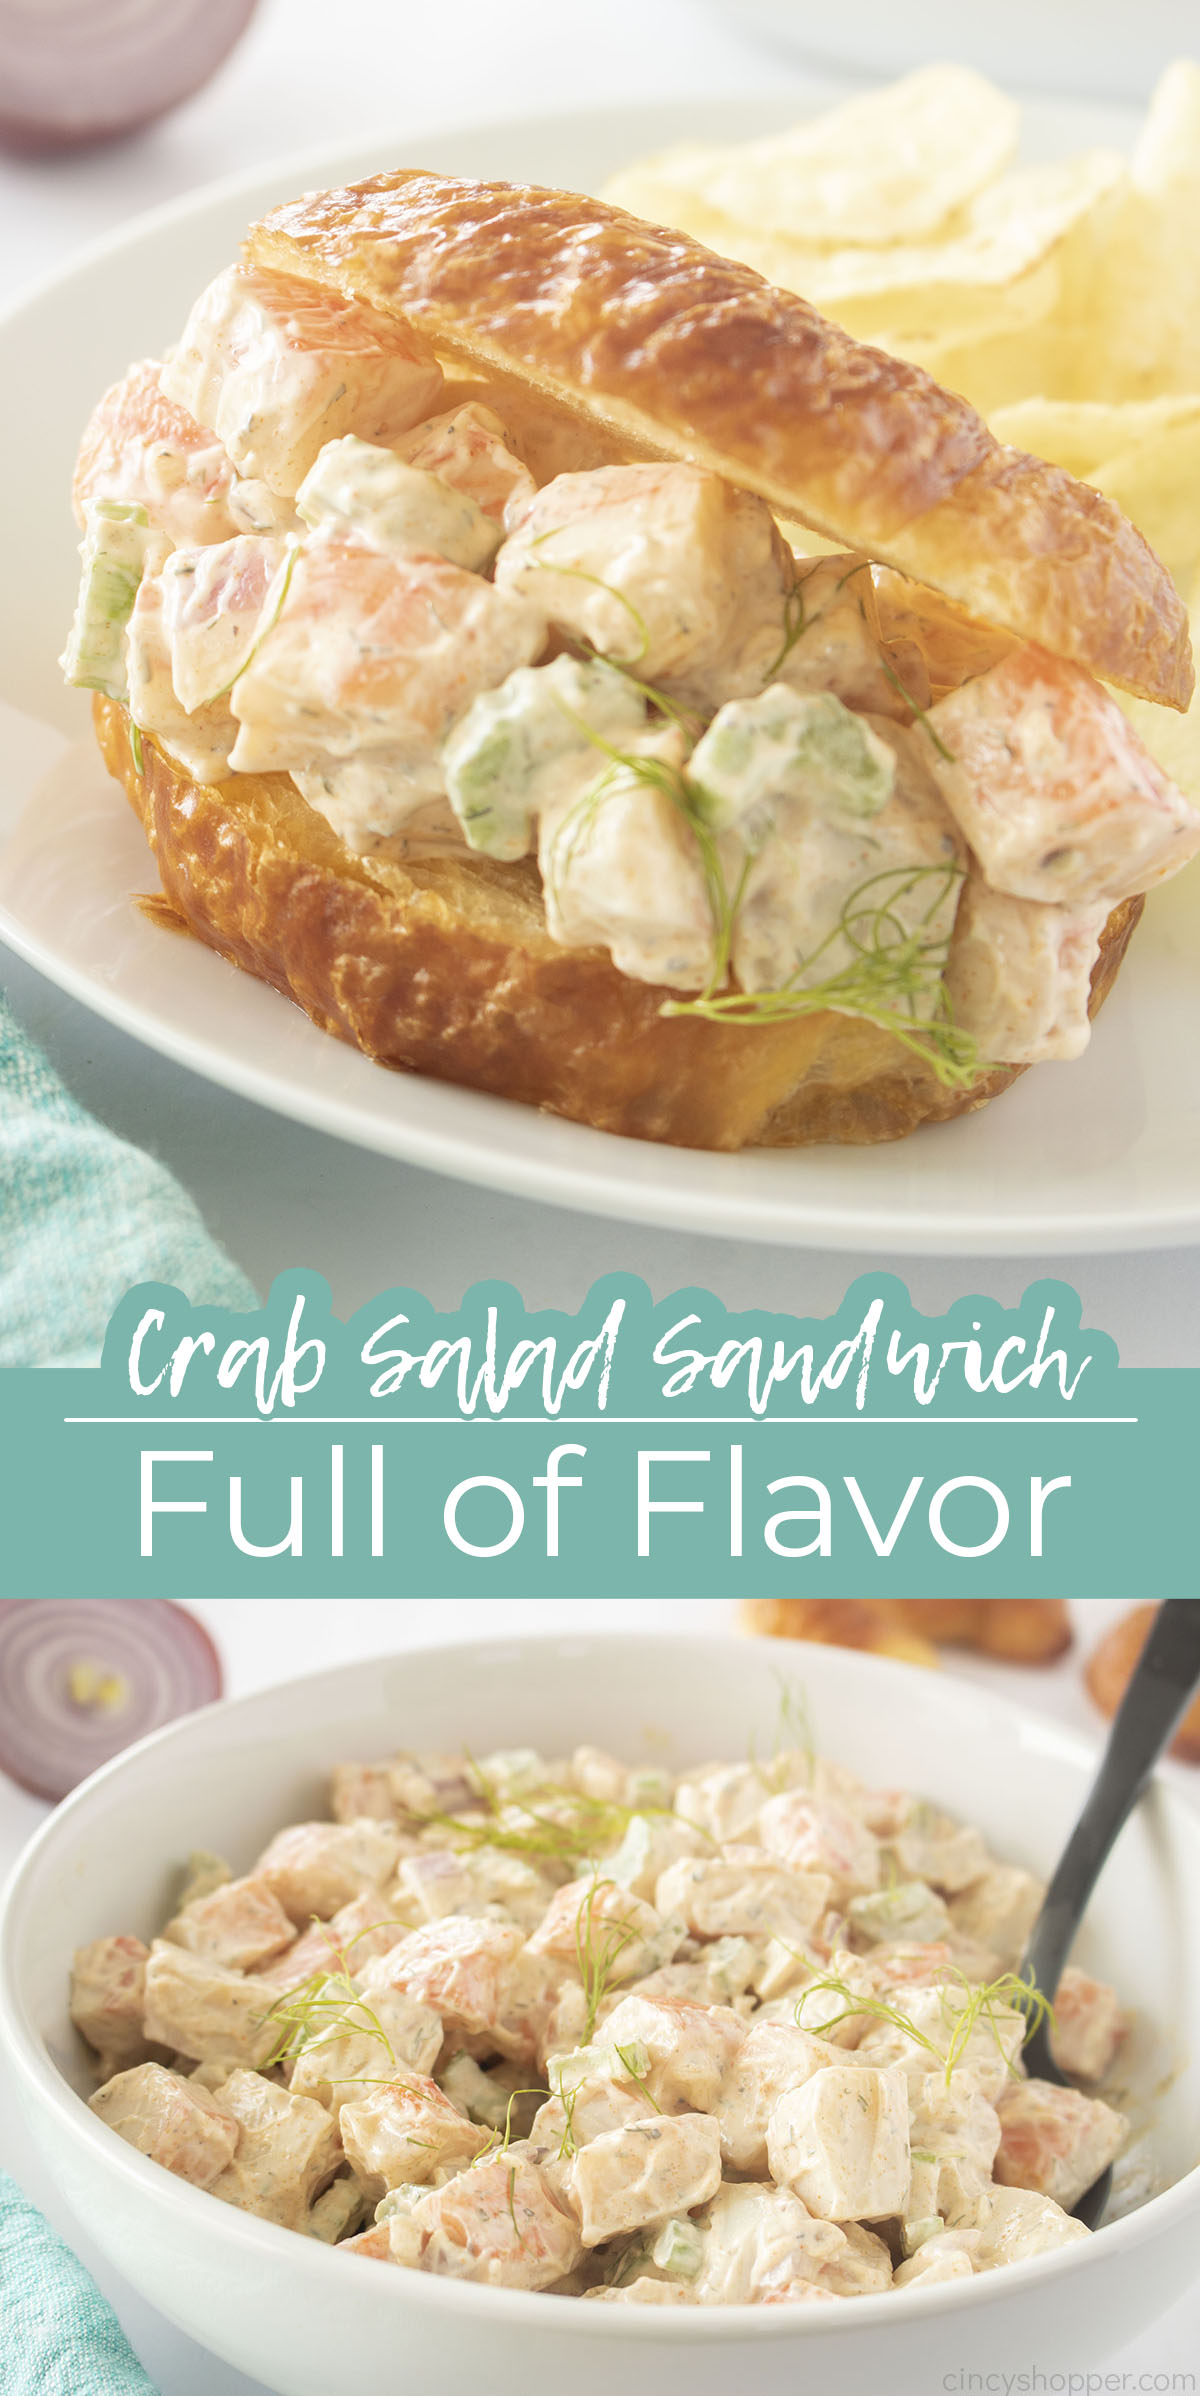 Long in text on image Crab Salad Sandwich Full of Flavor.